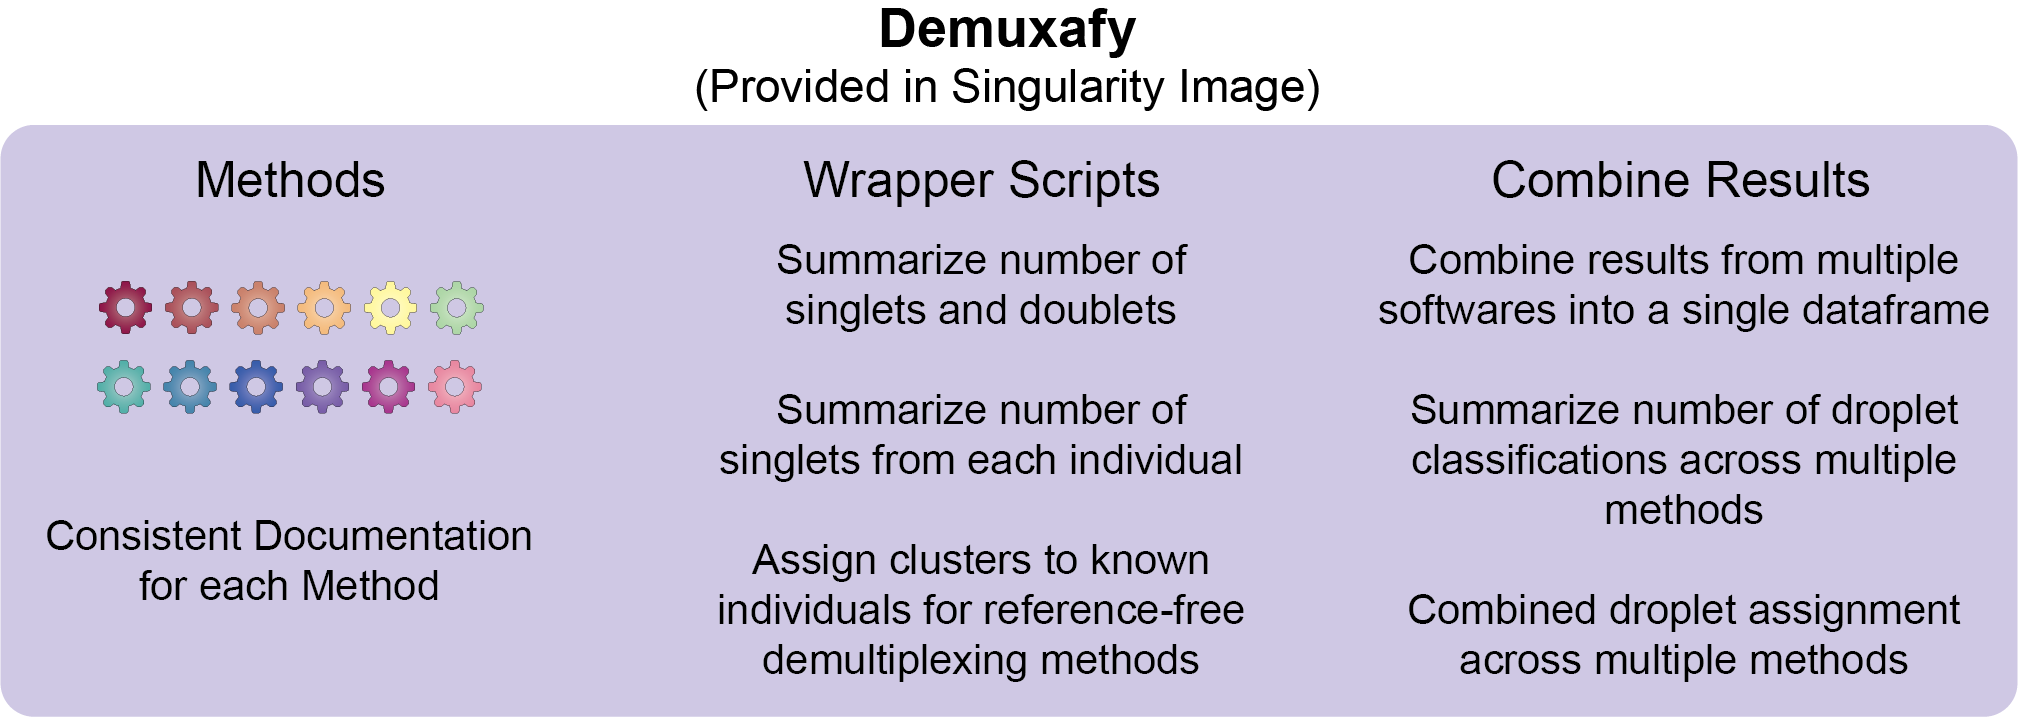 _images/Demuxafy.png